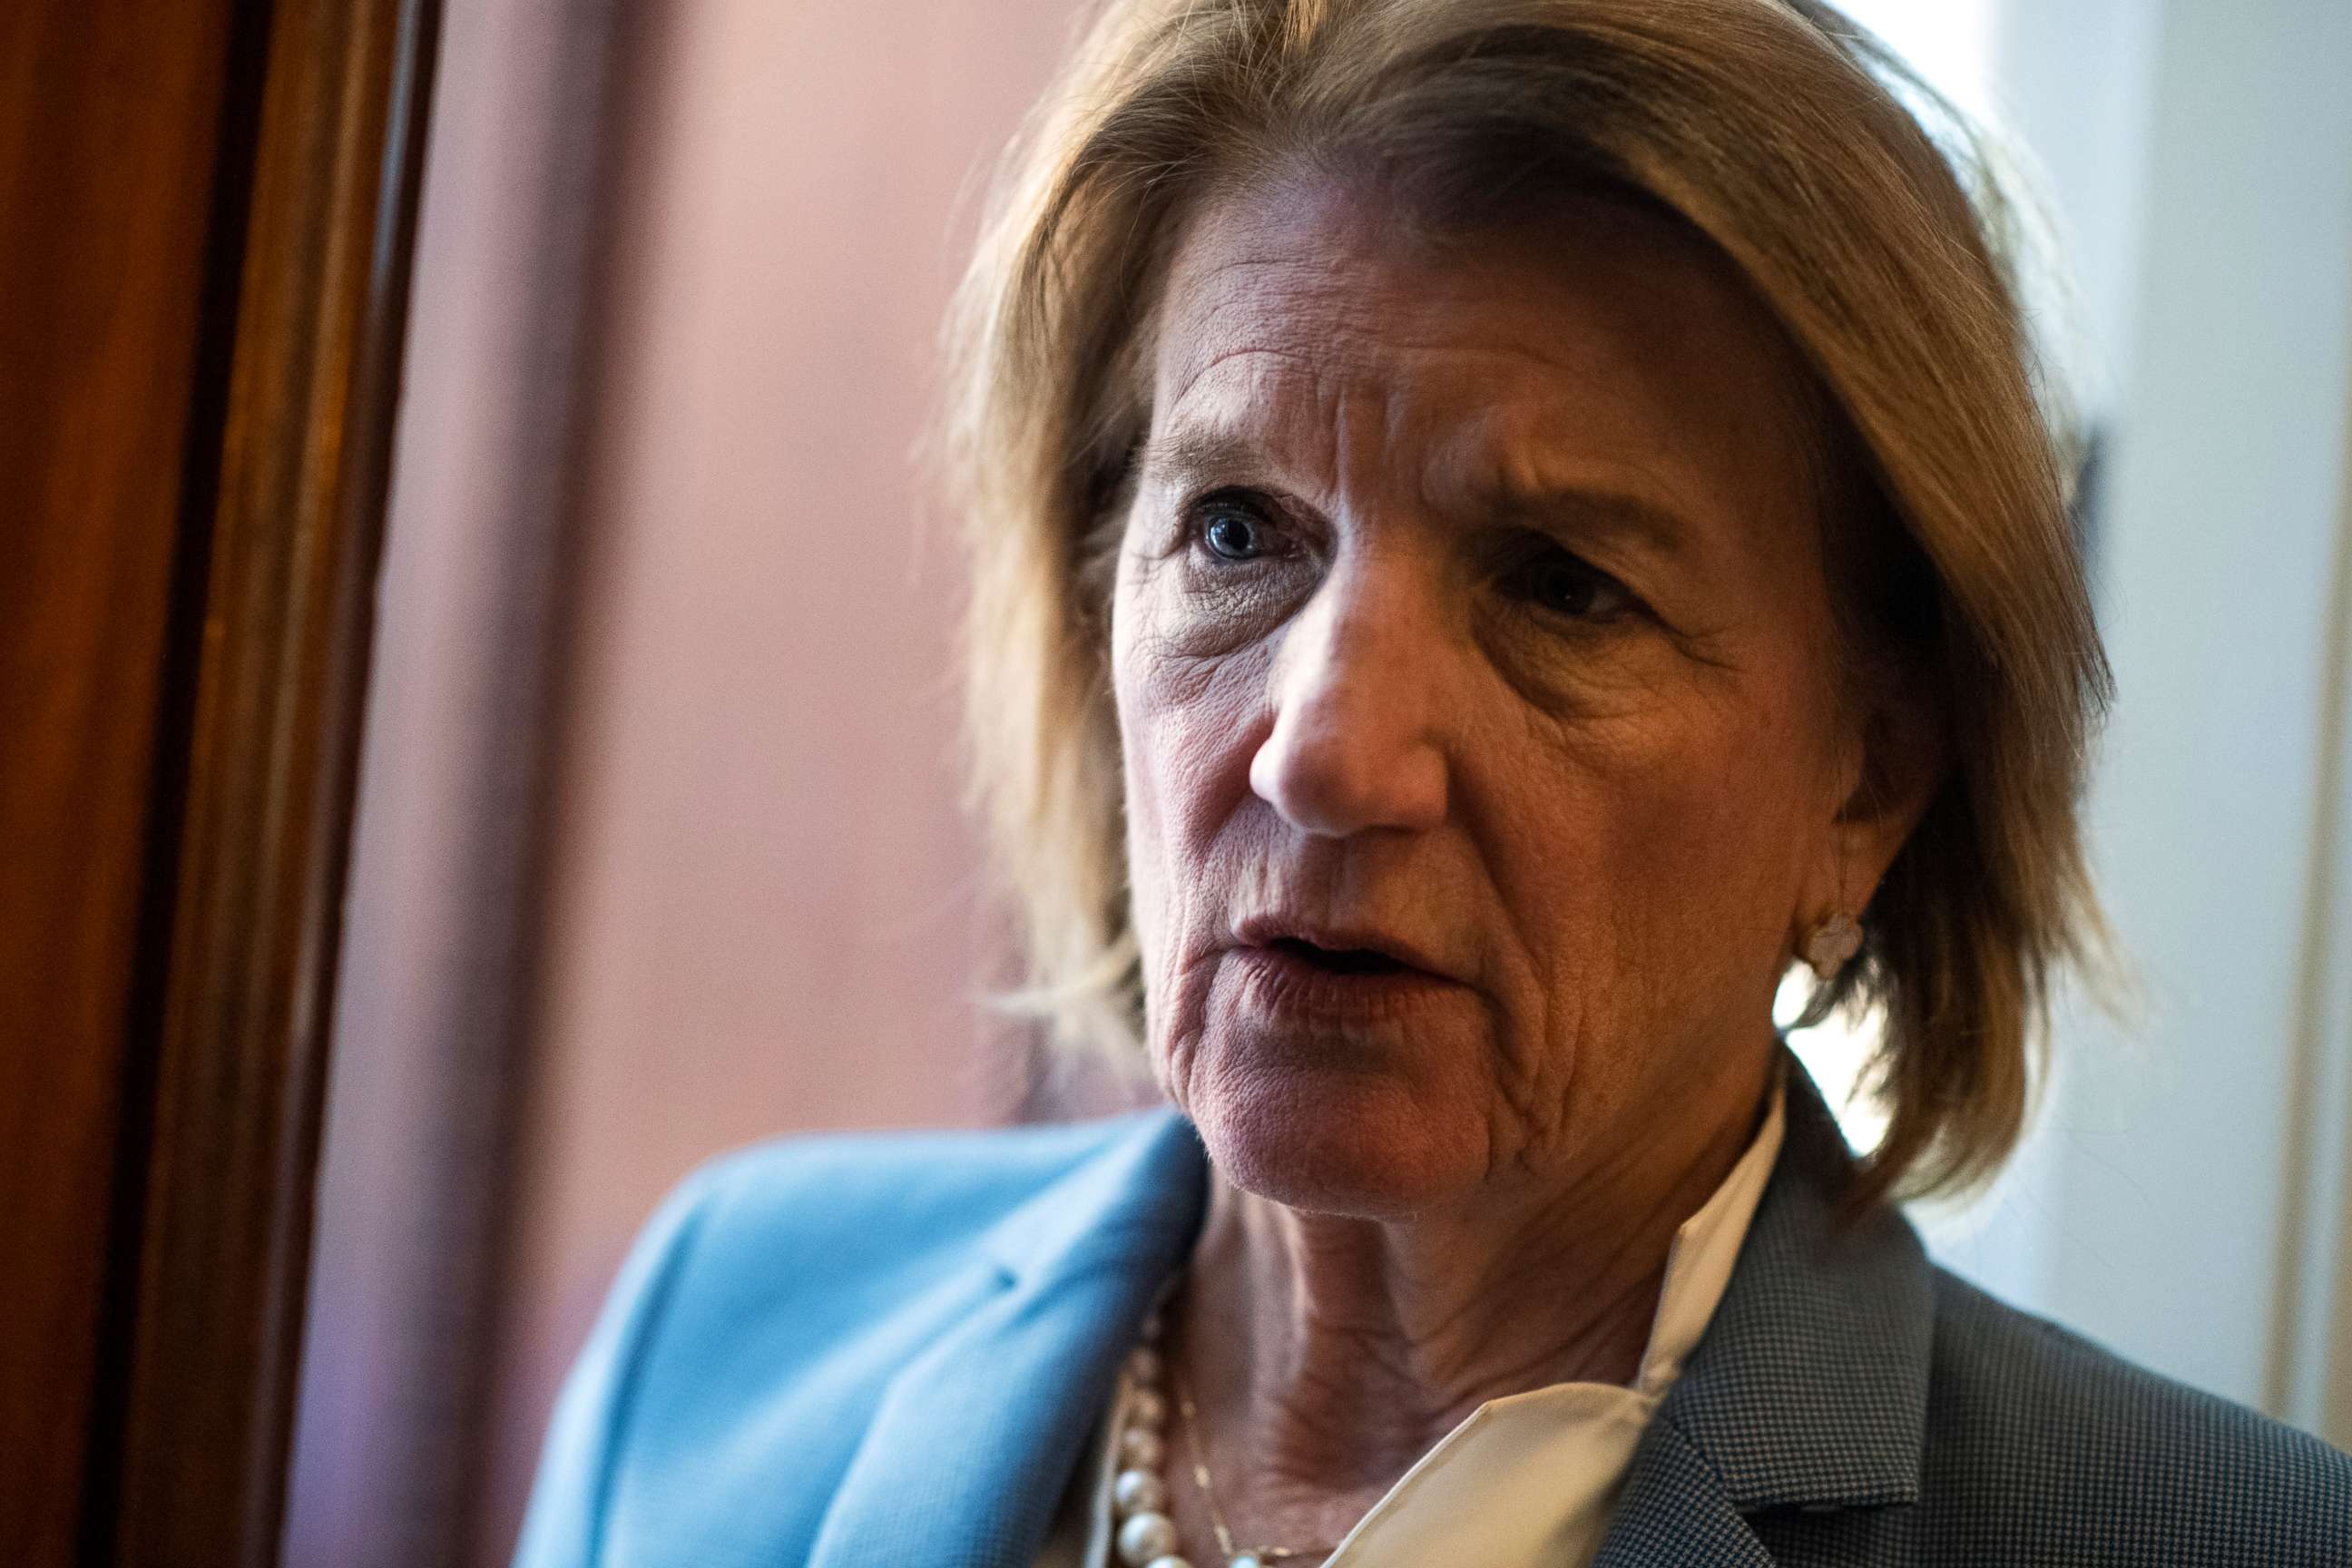 PHOTO: Sen. Shelley Moore Capito talks with reporters in the Capitol during a vote, May 25, 2021.